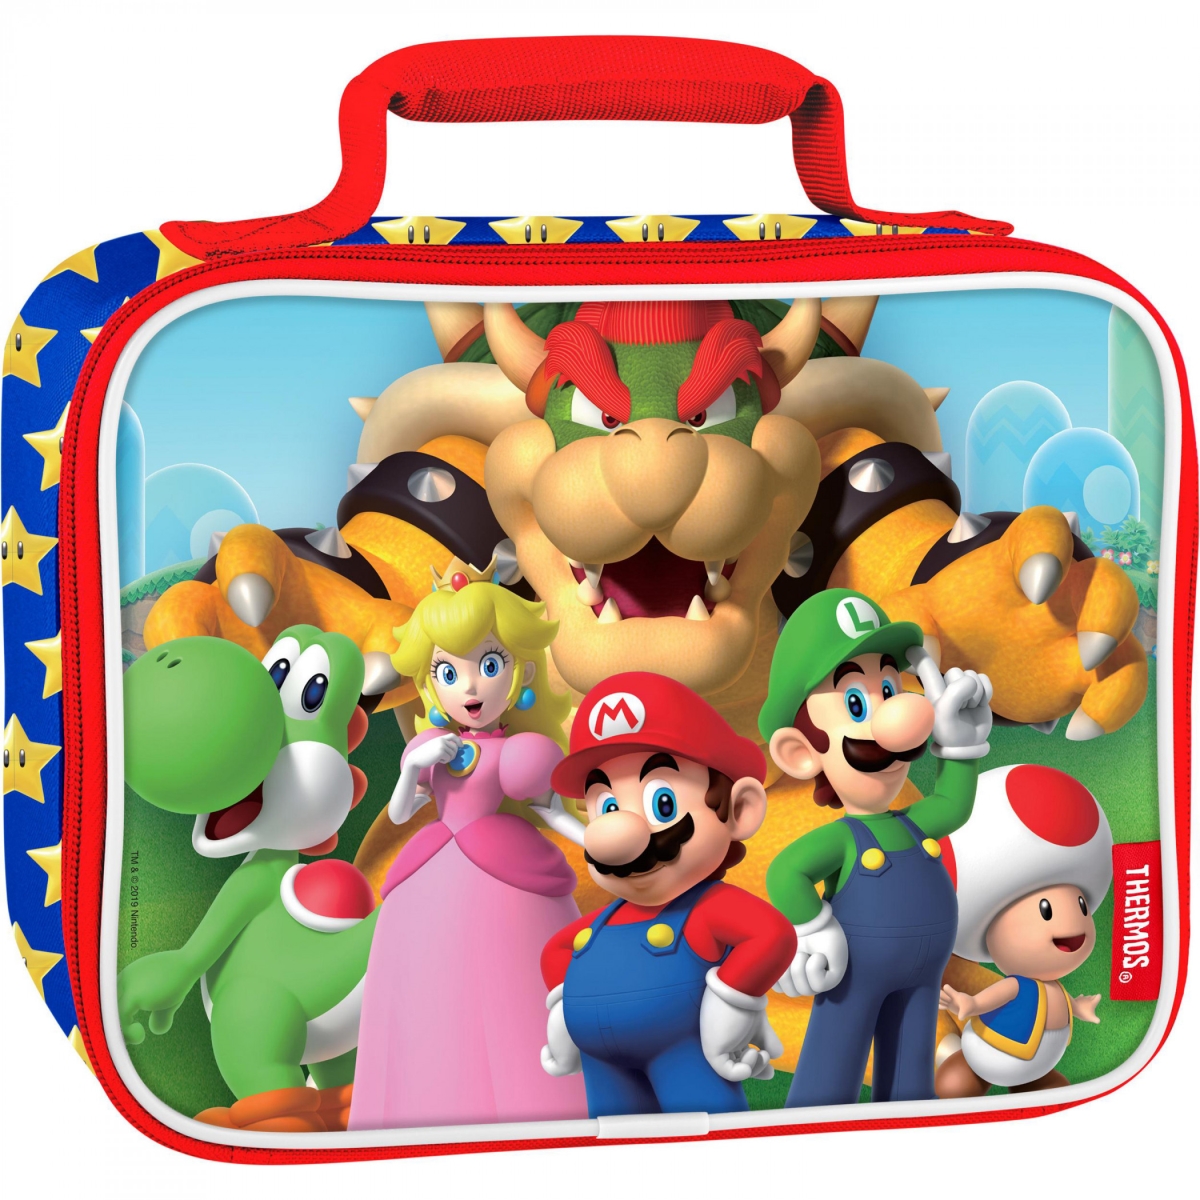 UPC 041205732082 product image for 860346  Towering Bowser Thermos Insulated Lunch Box, Blue & Red | upcitemdb.com